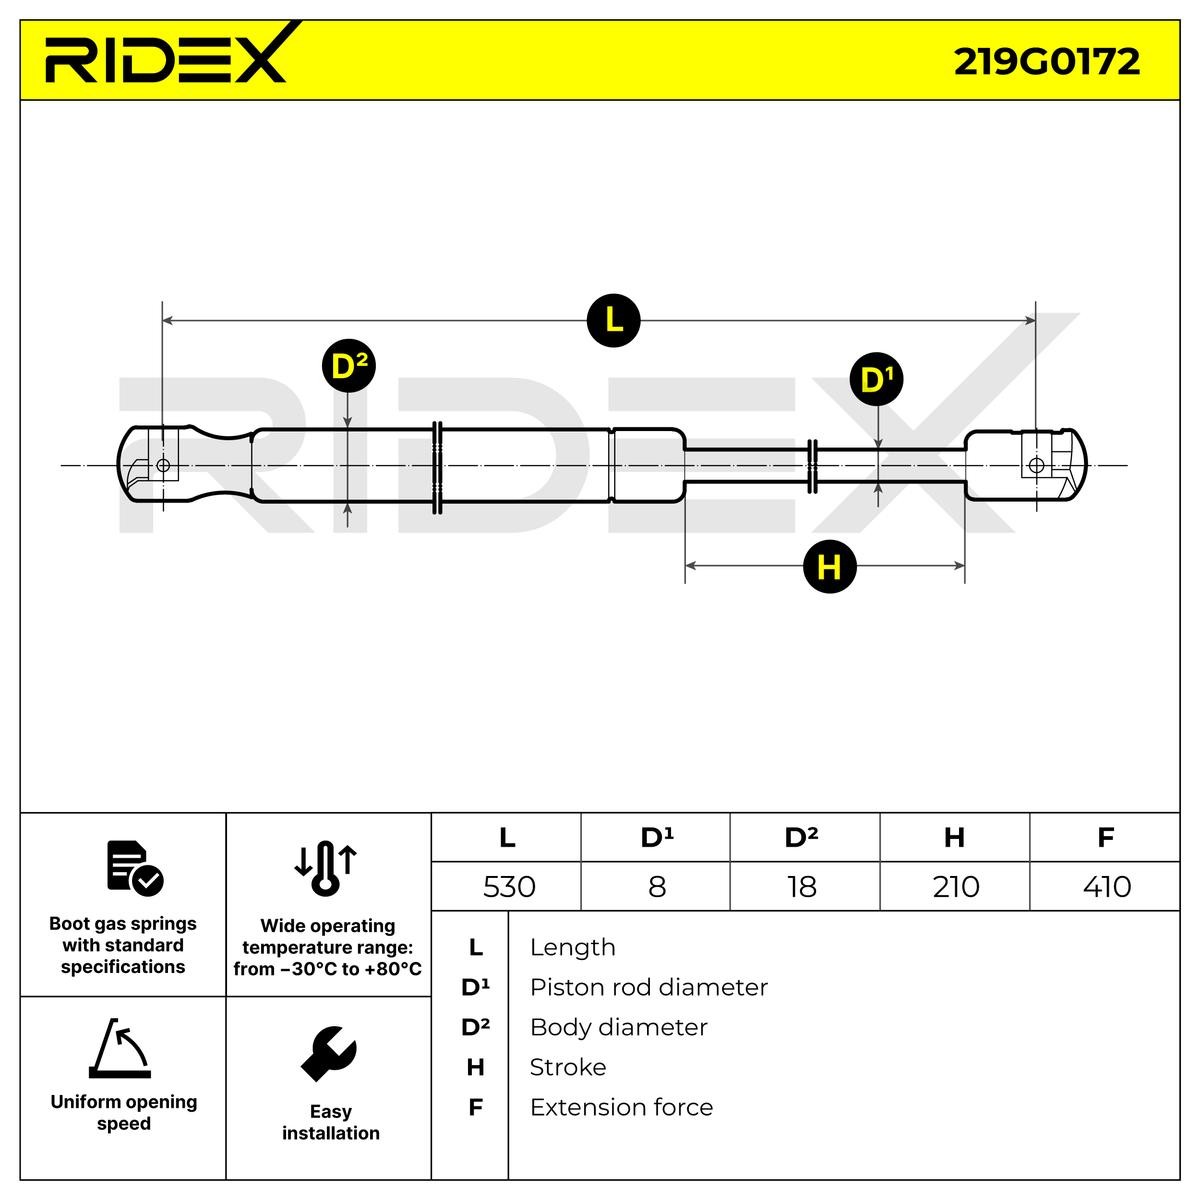 Tailgate strut 219G0172 from RIDEX